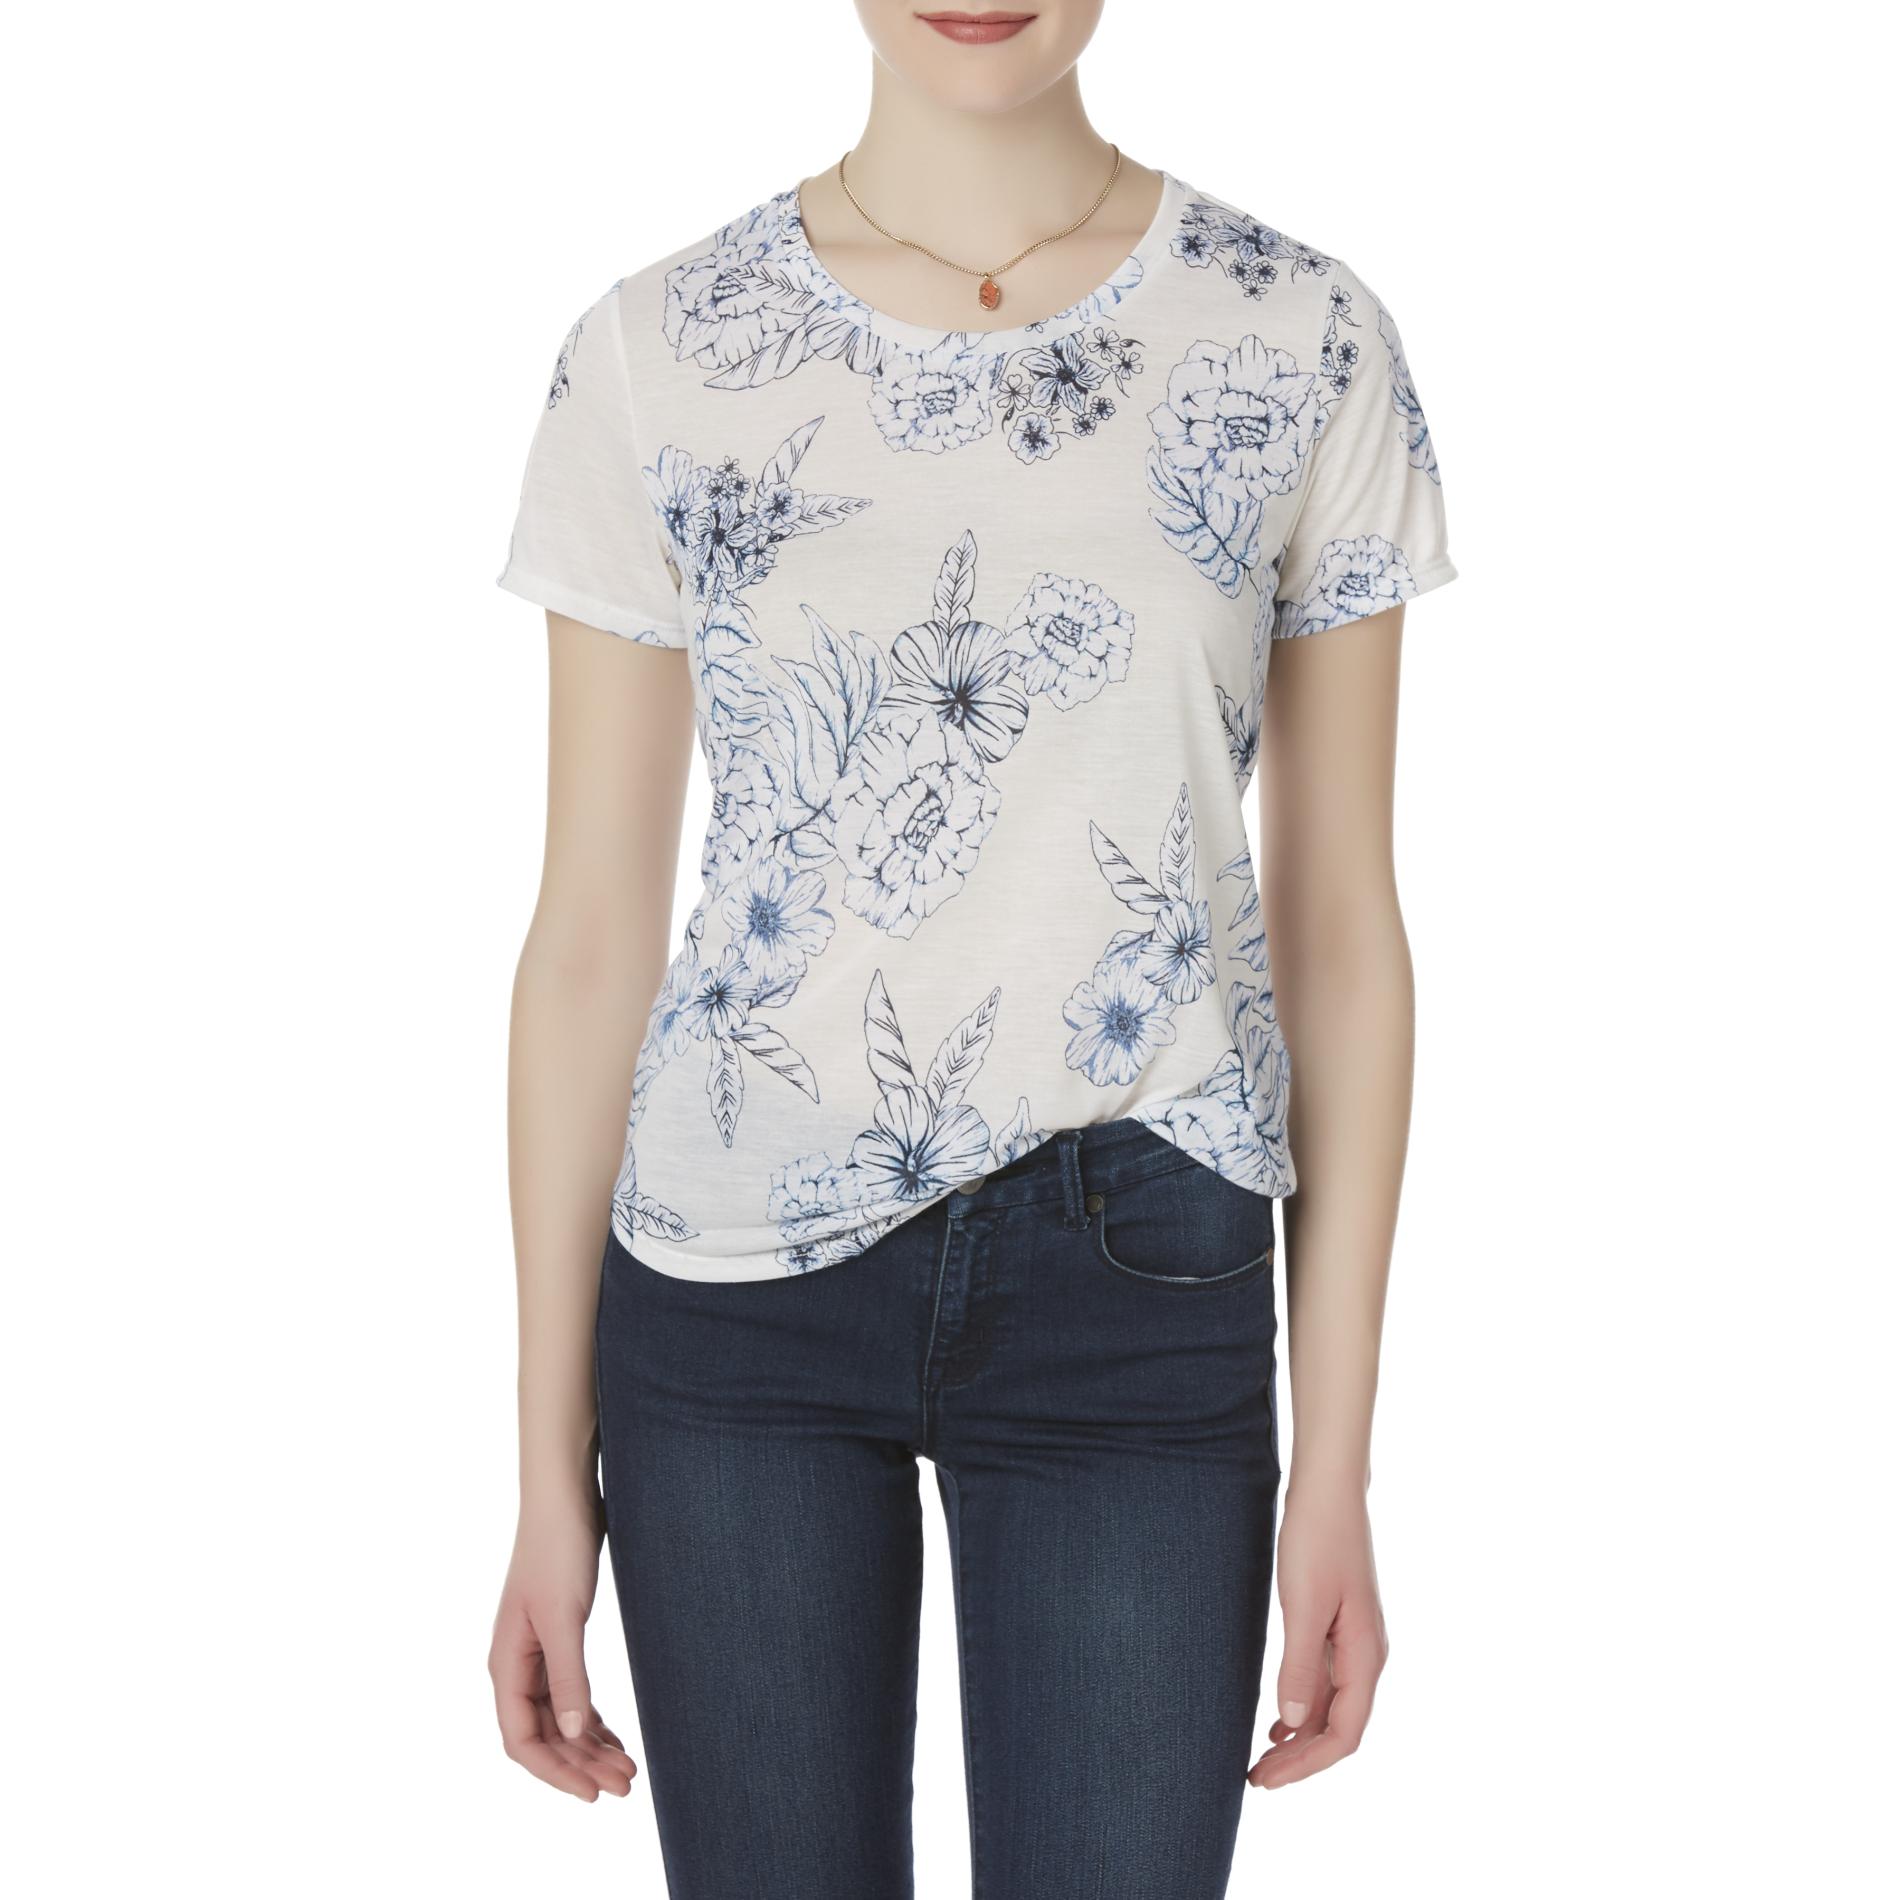 Simply Styled Women's Graphic T-Shirt - Floral